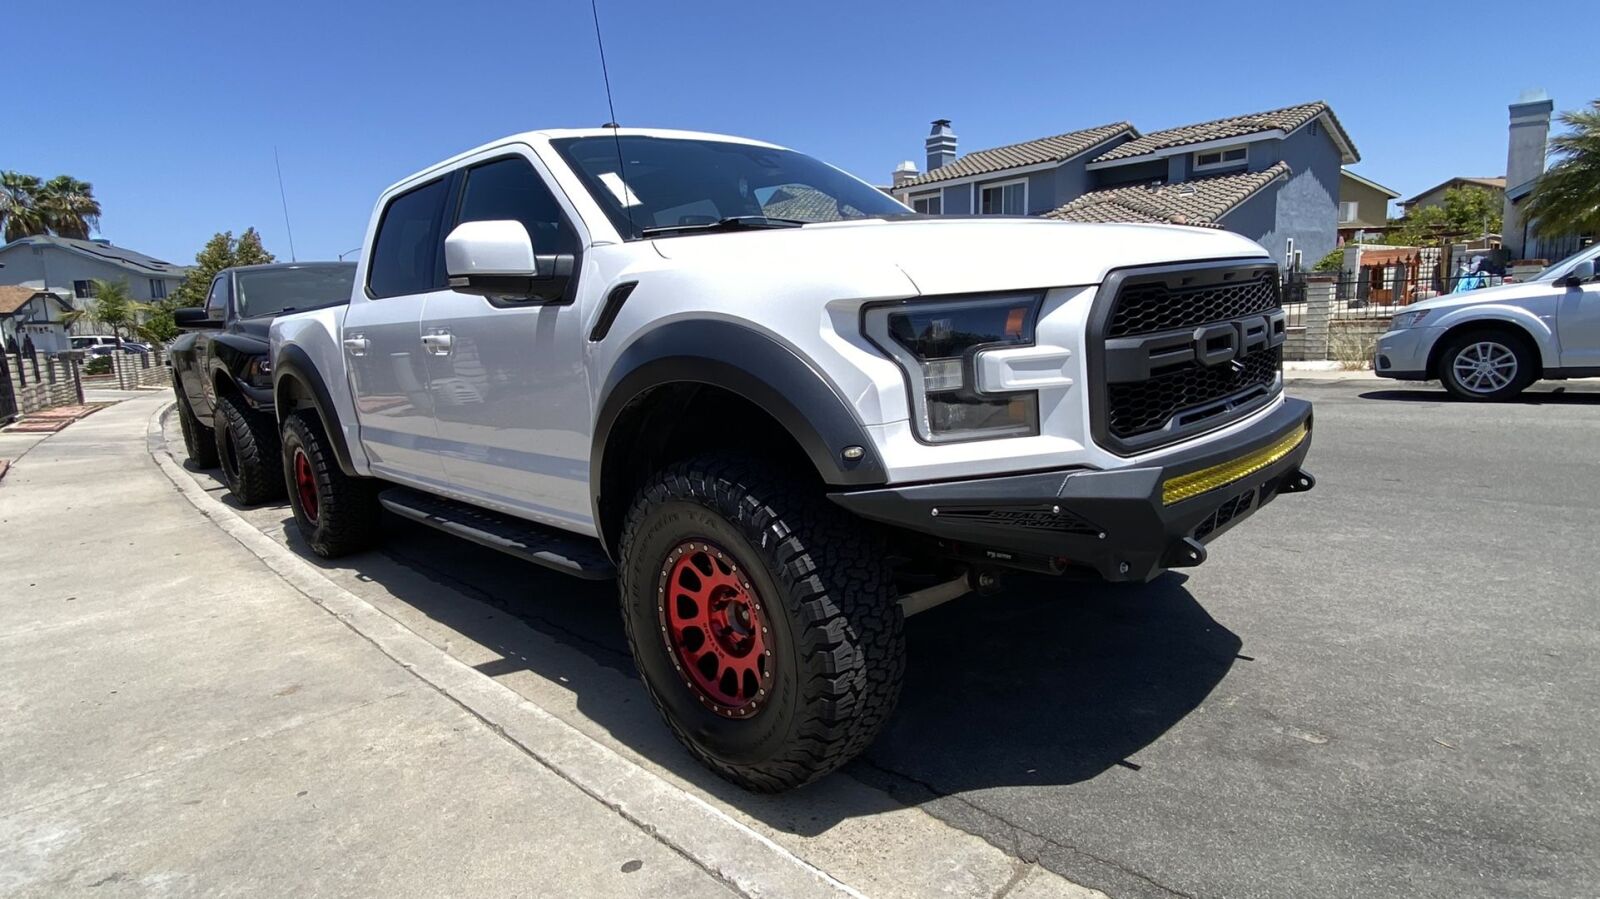 For Sale: 2018 ford raptor upgraded  - photo1